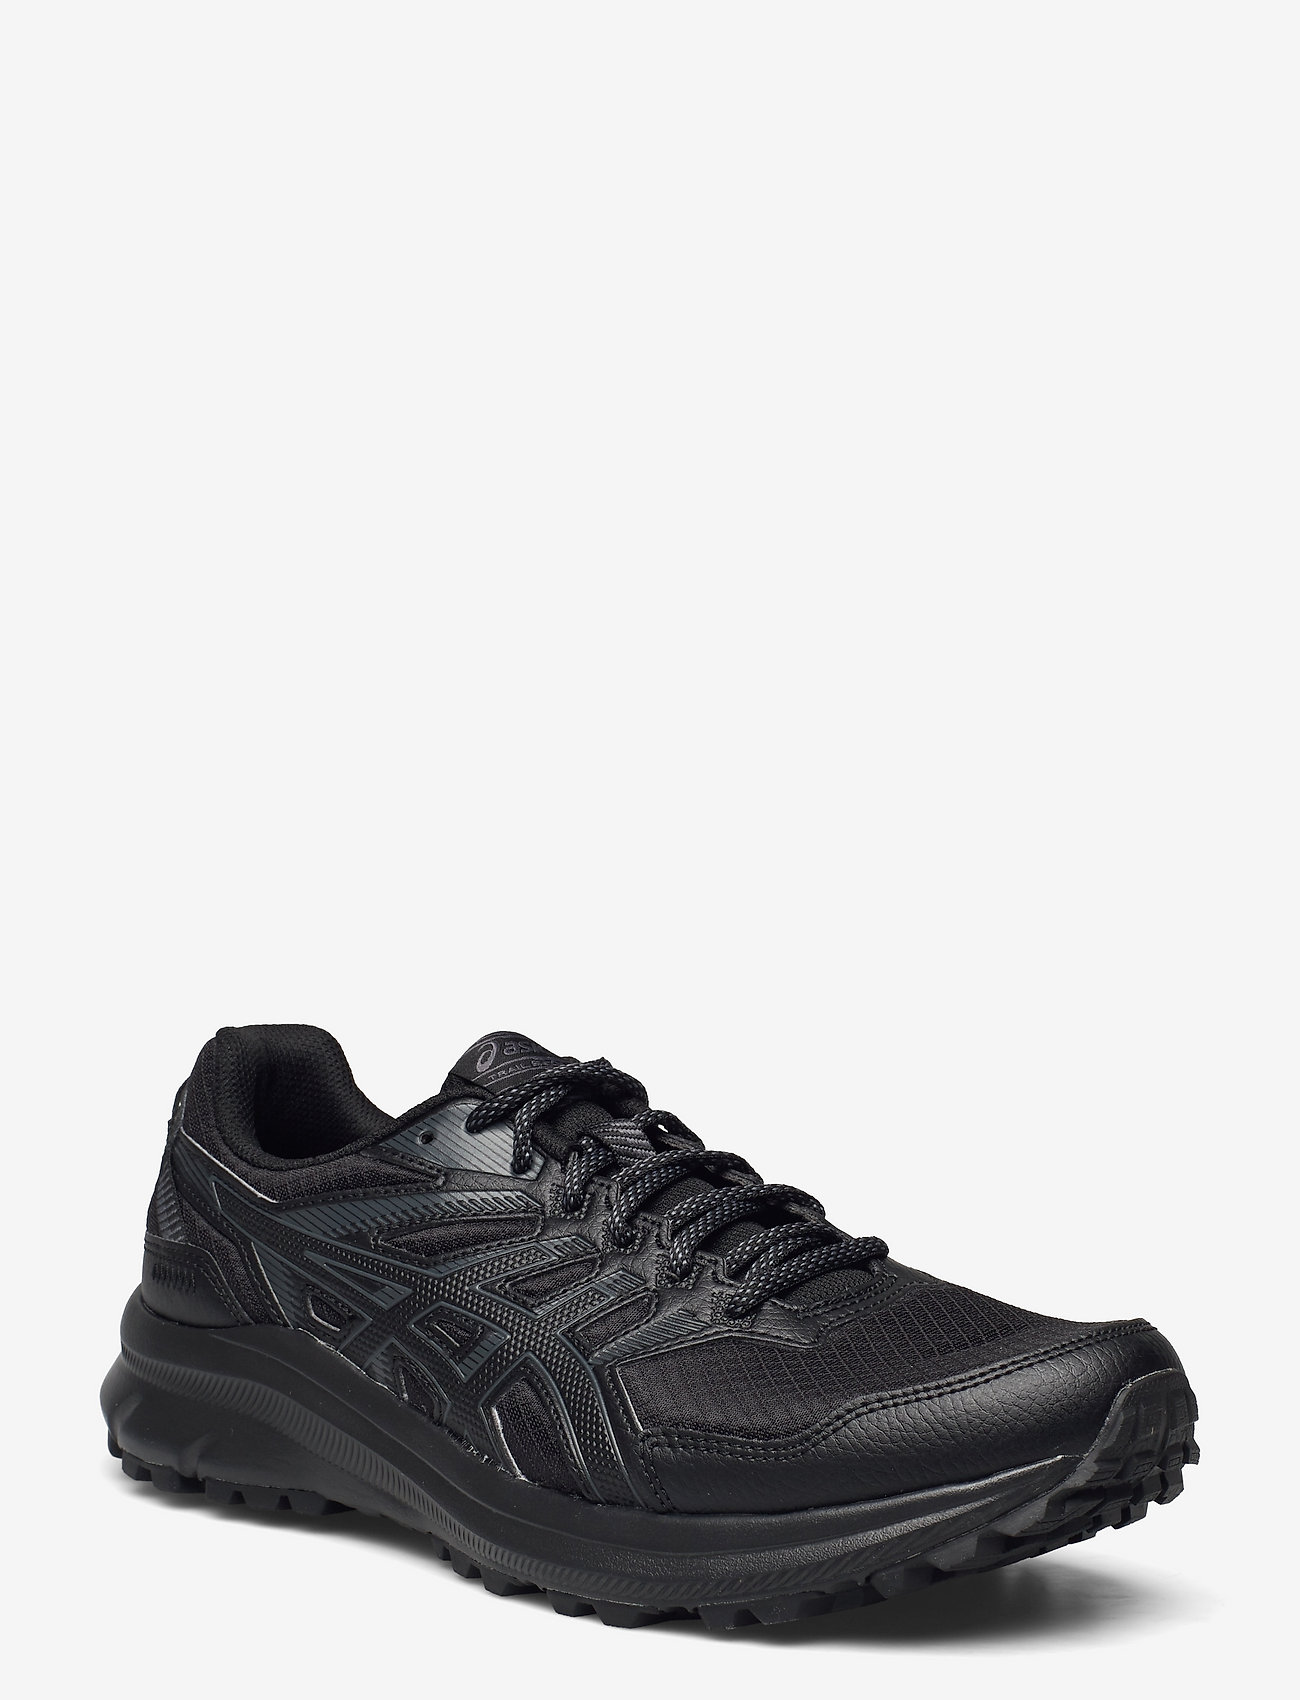 Asics - TRAIL SCOUT 2 - running shoes - black/carrier grey - 0